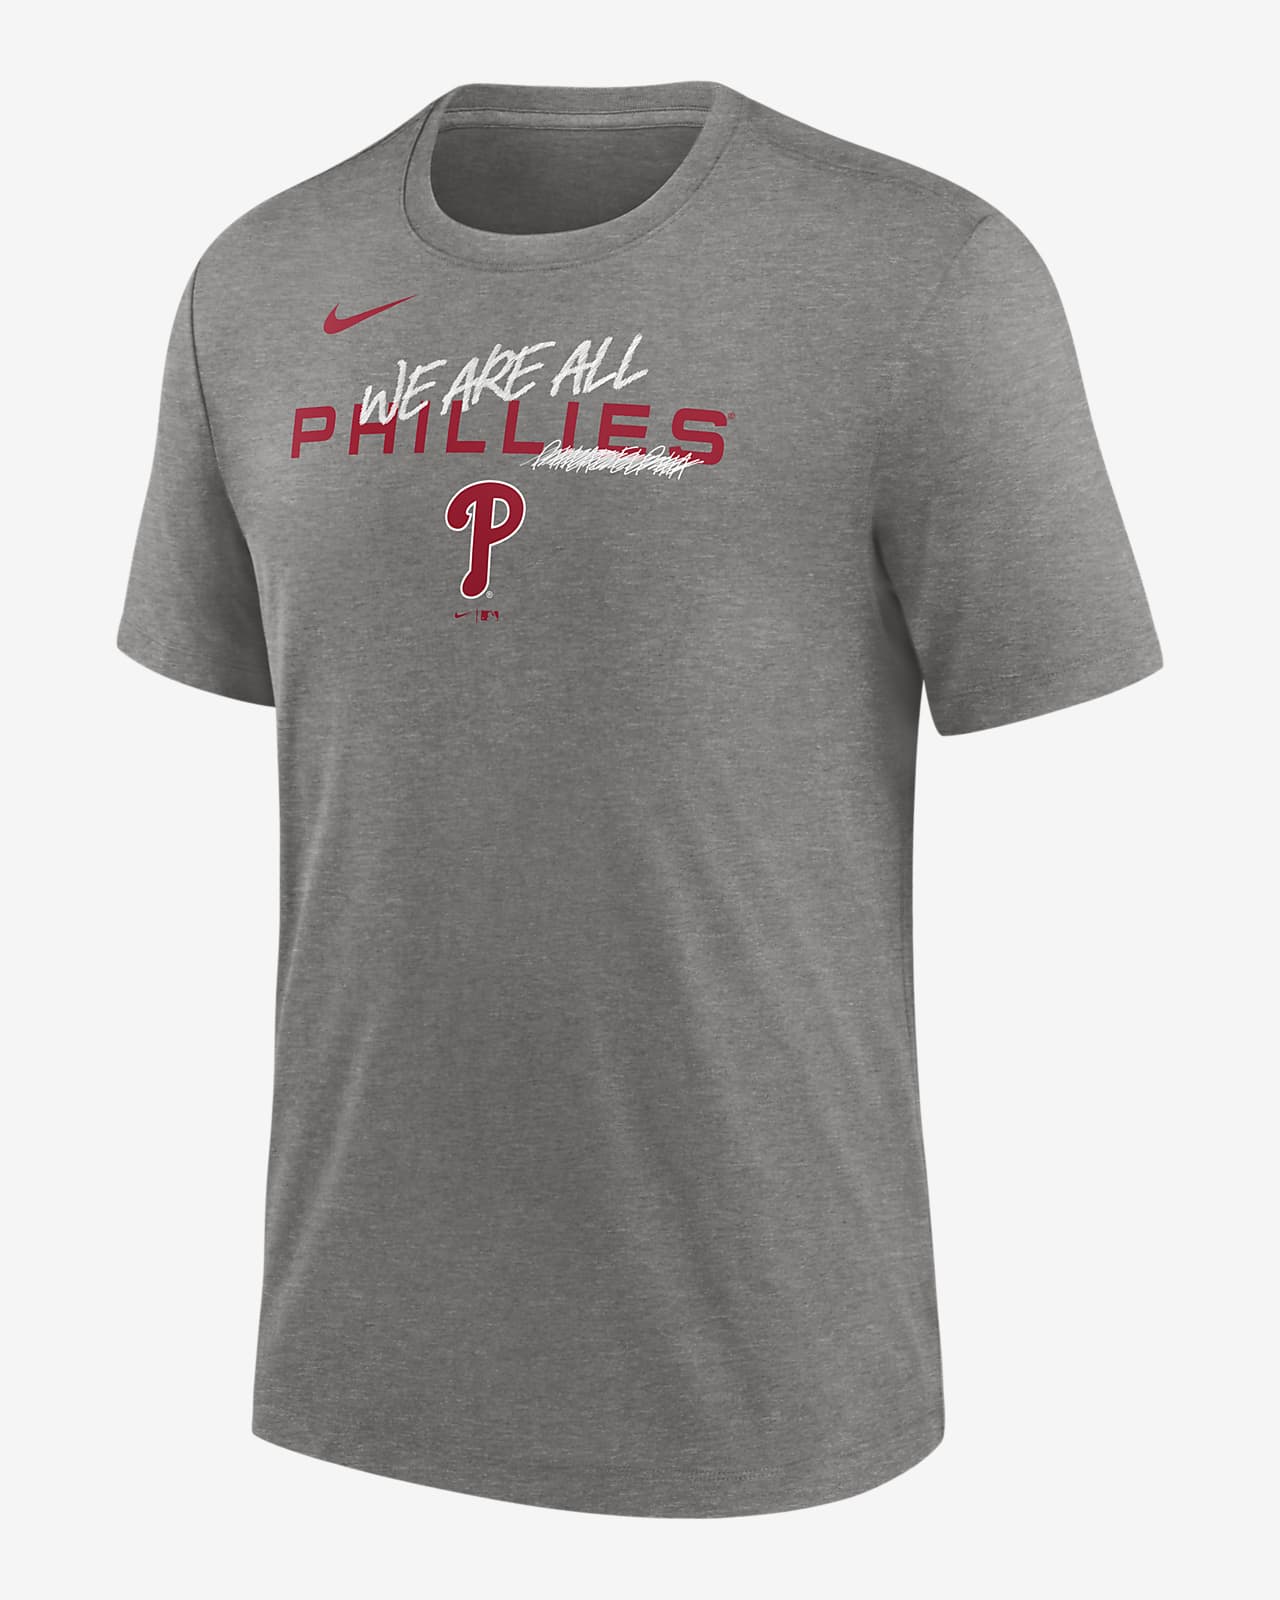 phillies clothing for sale